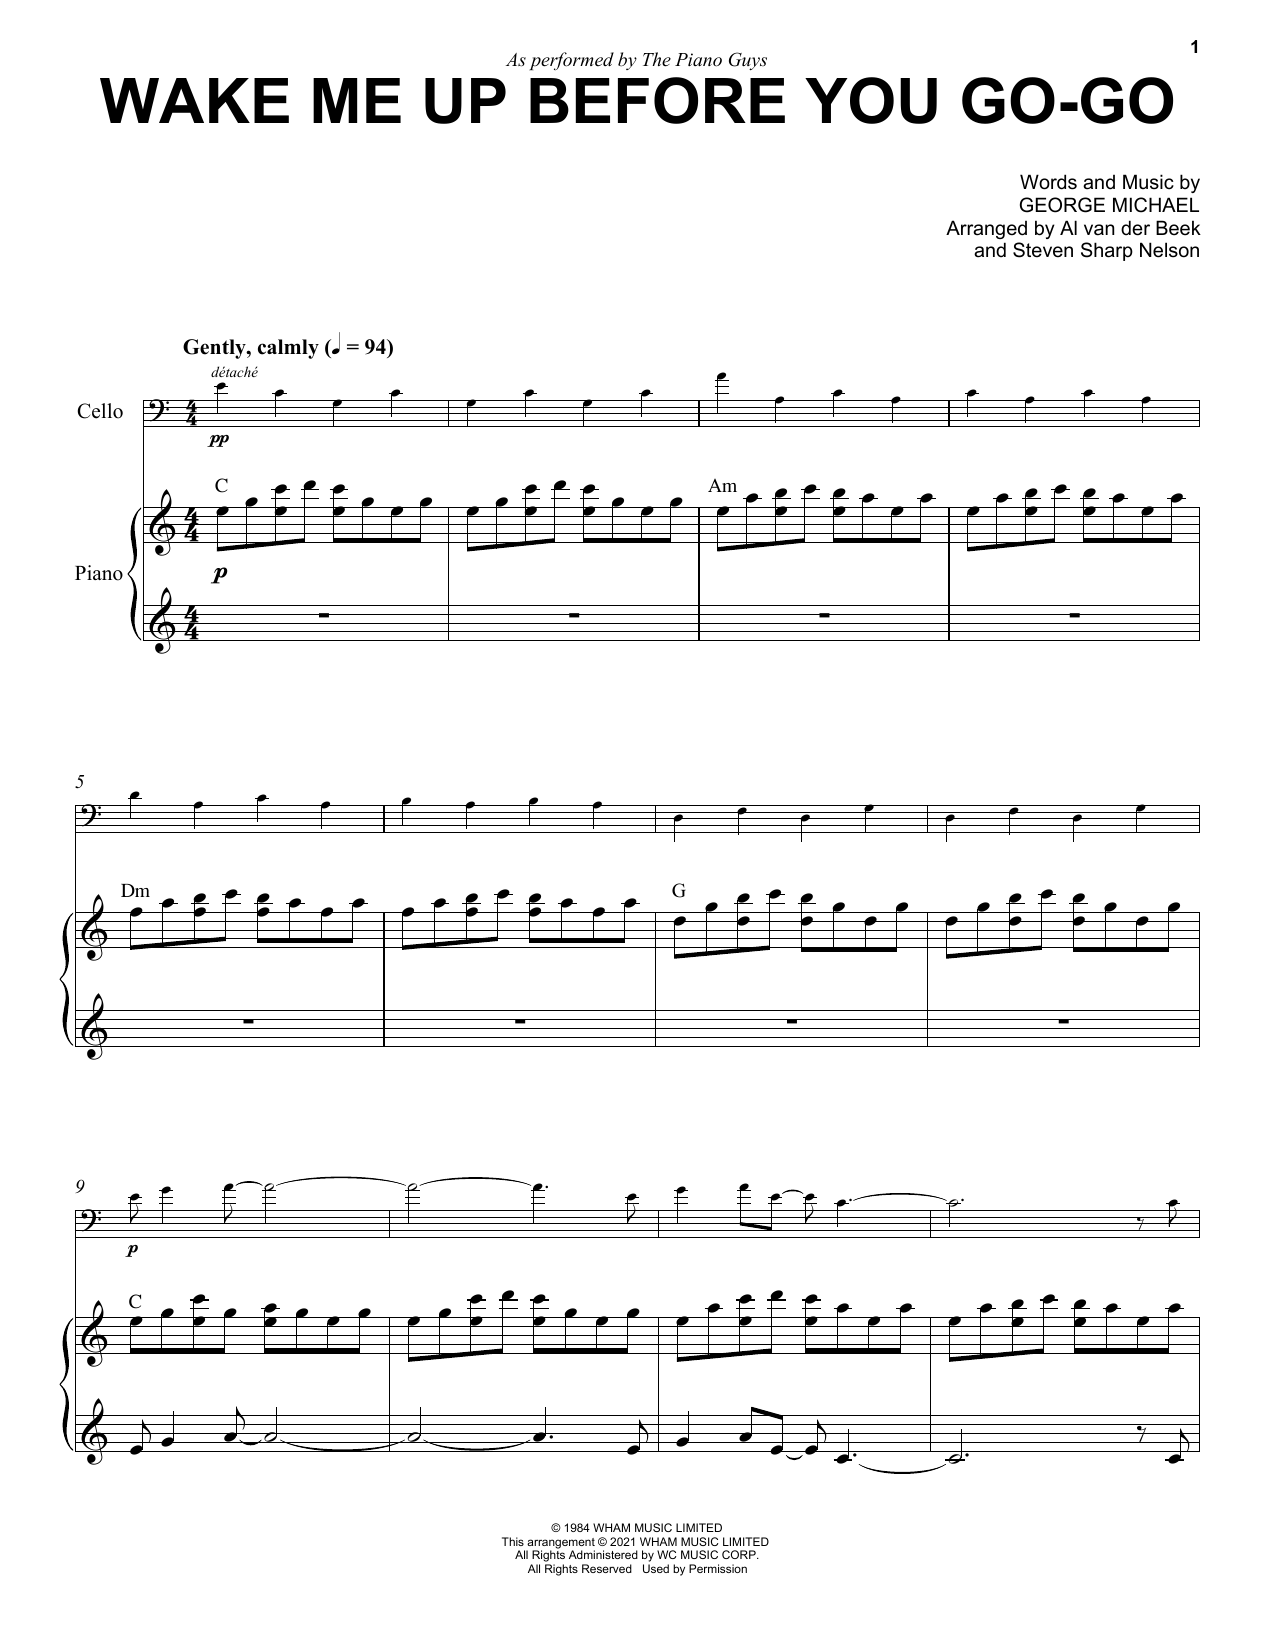 Download The Piano Guys Wake Me Up Before You Go-Go Sheet Music